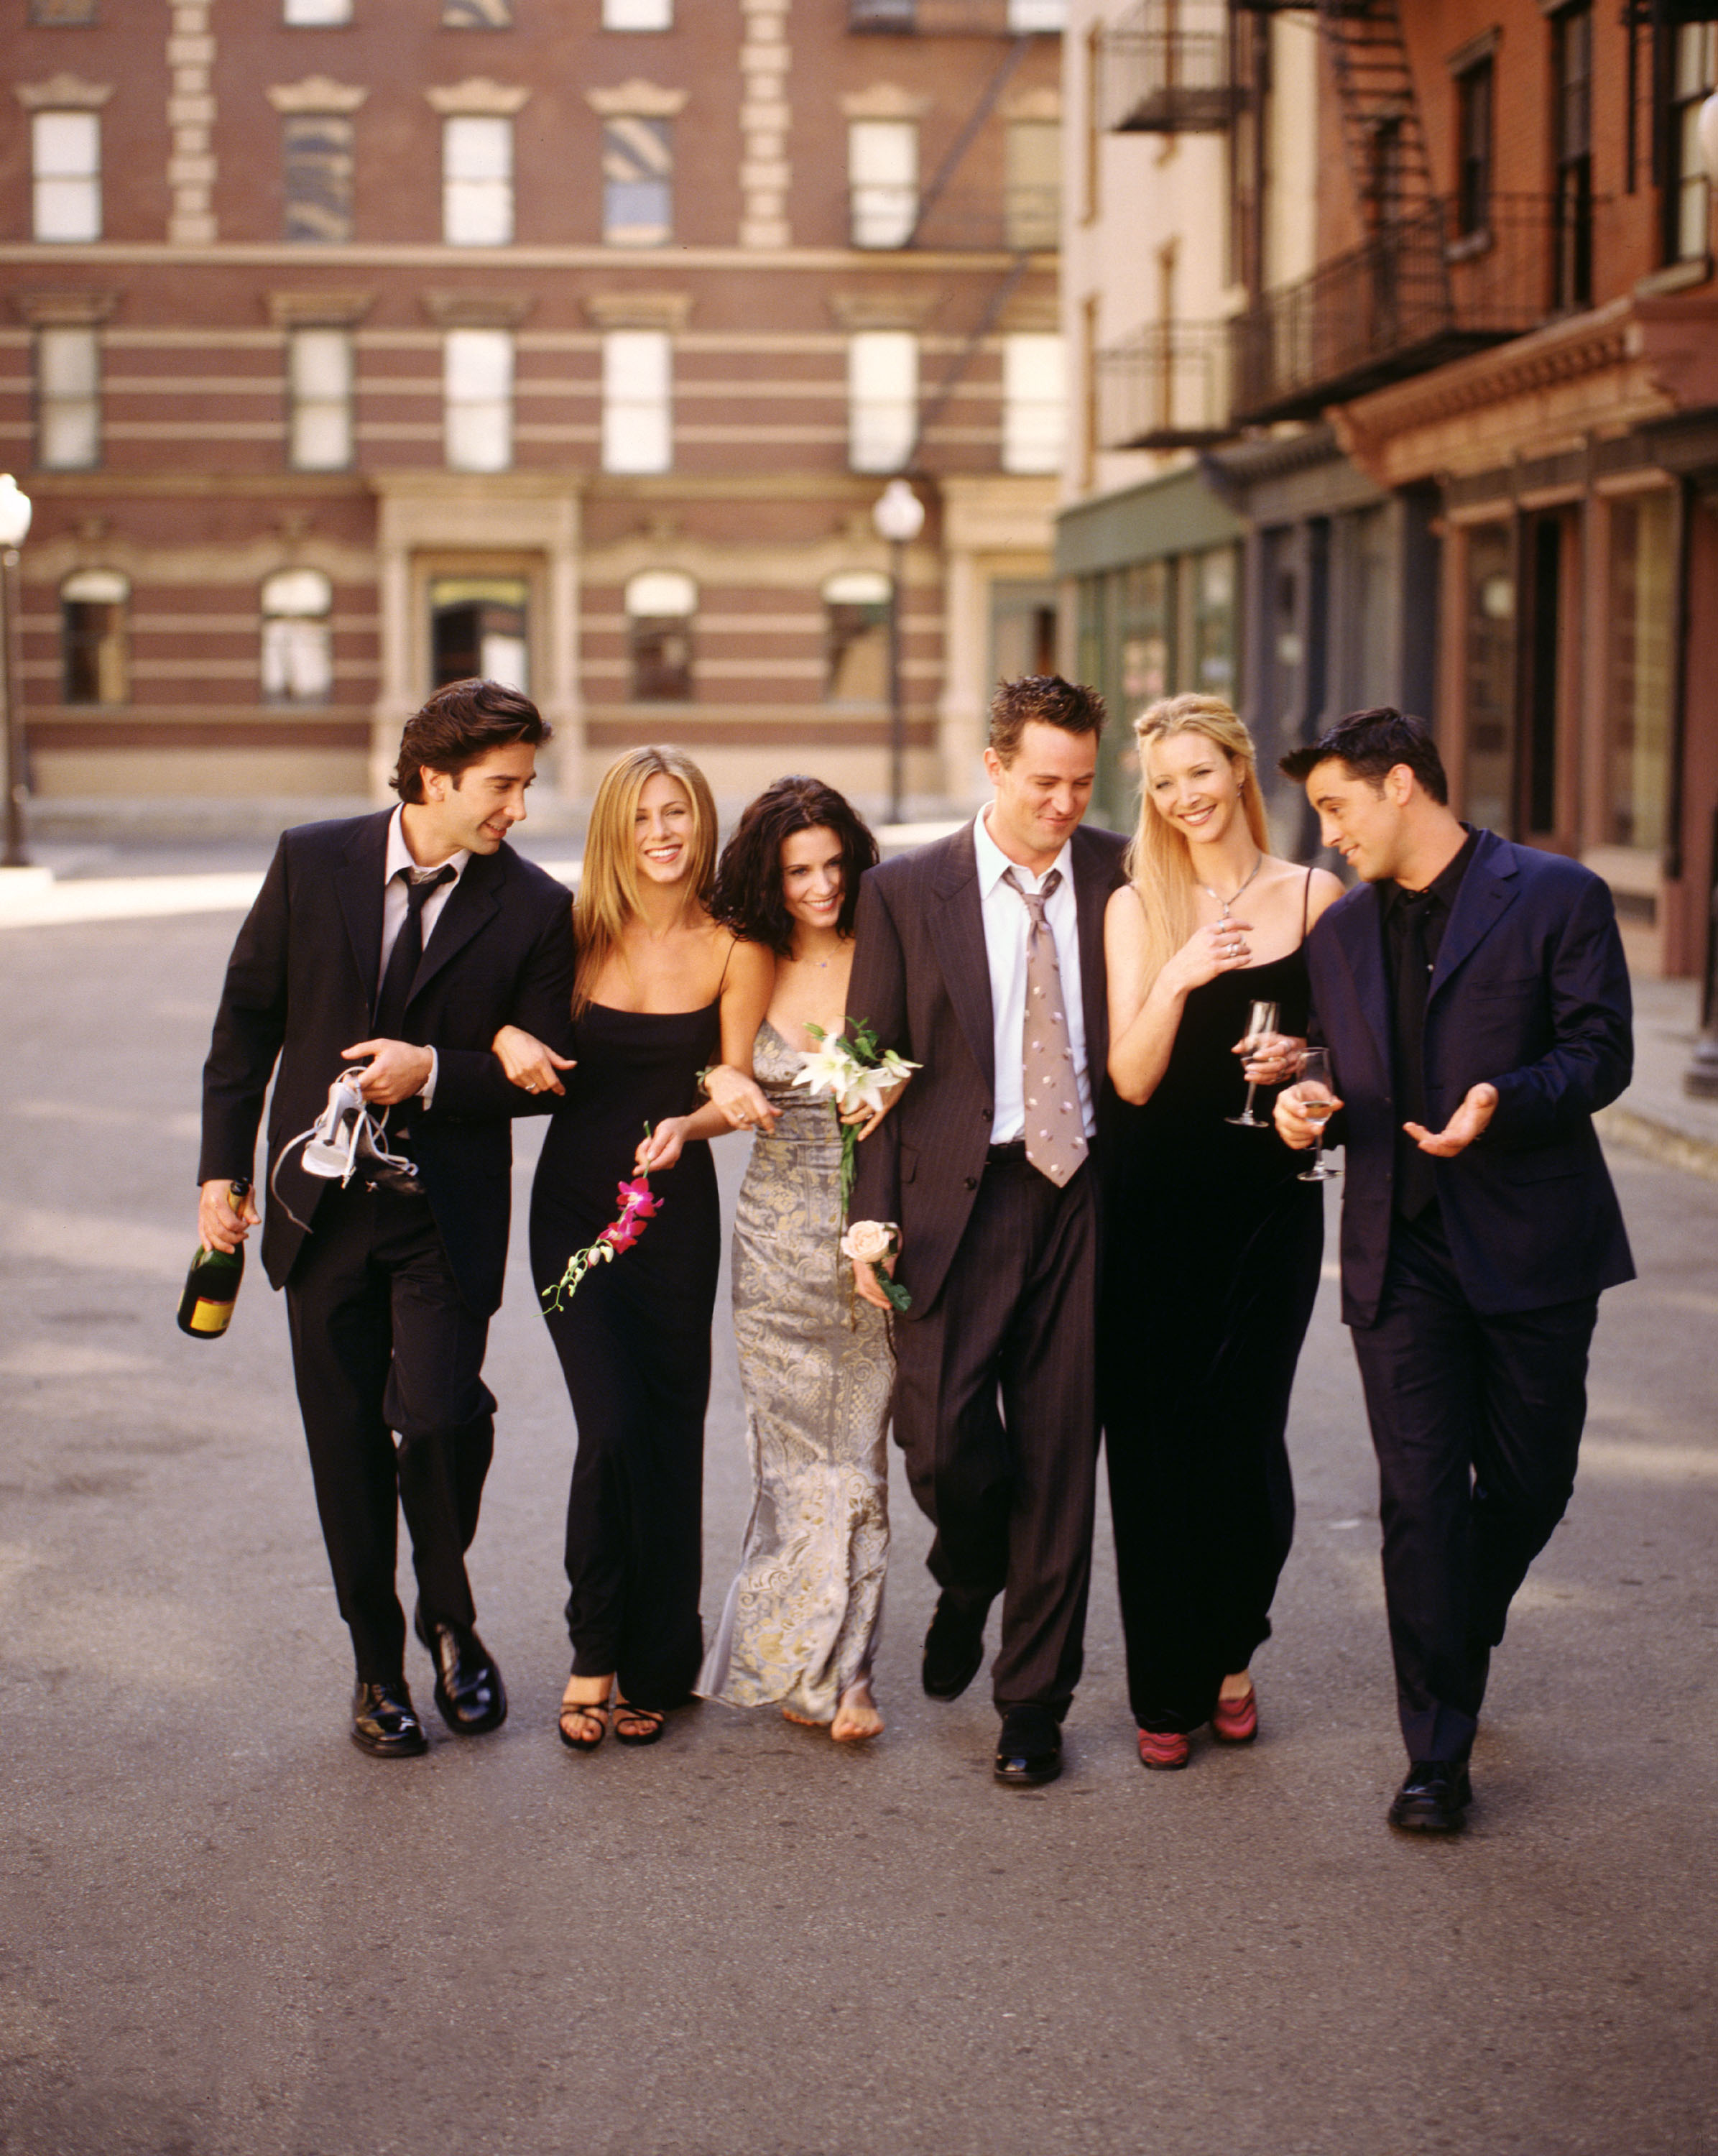 The cast in a scene walking down the street in suits and gowns